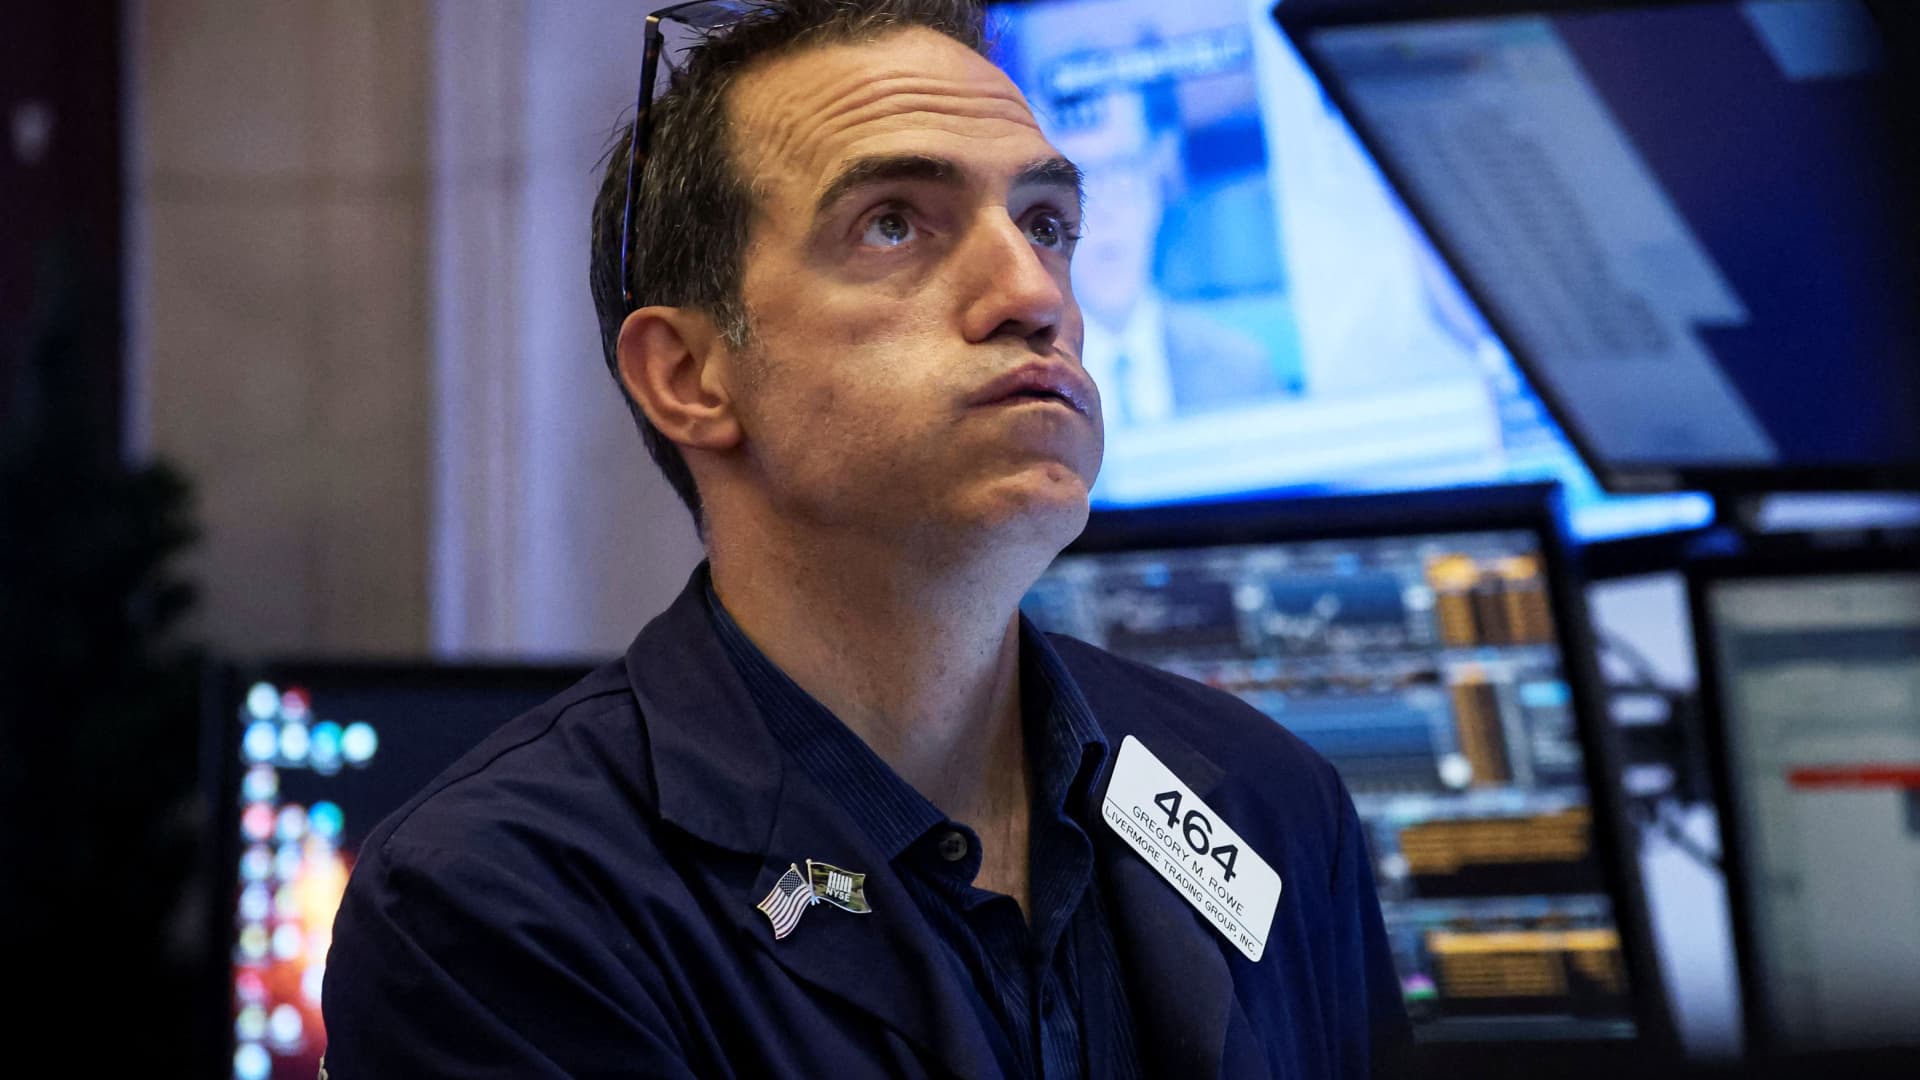 Global markets are tanking ahead of a huge week for central banks